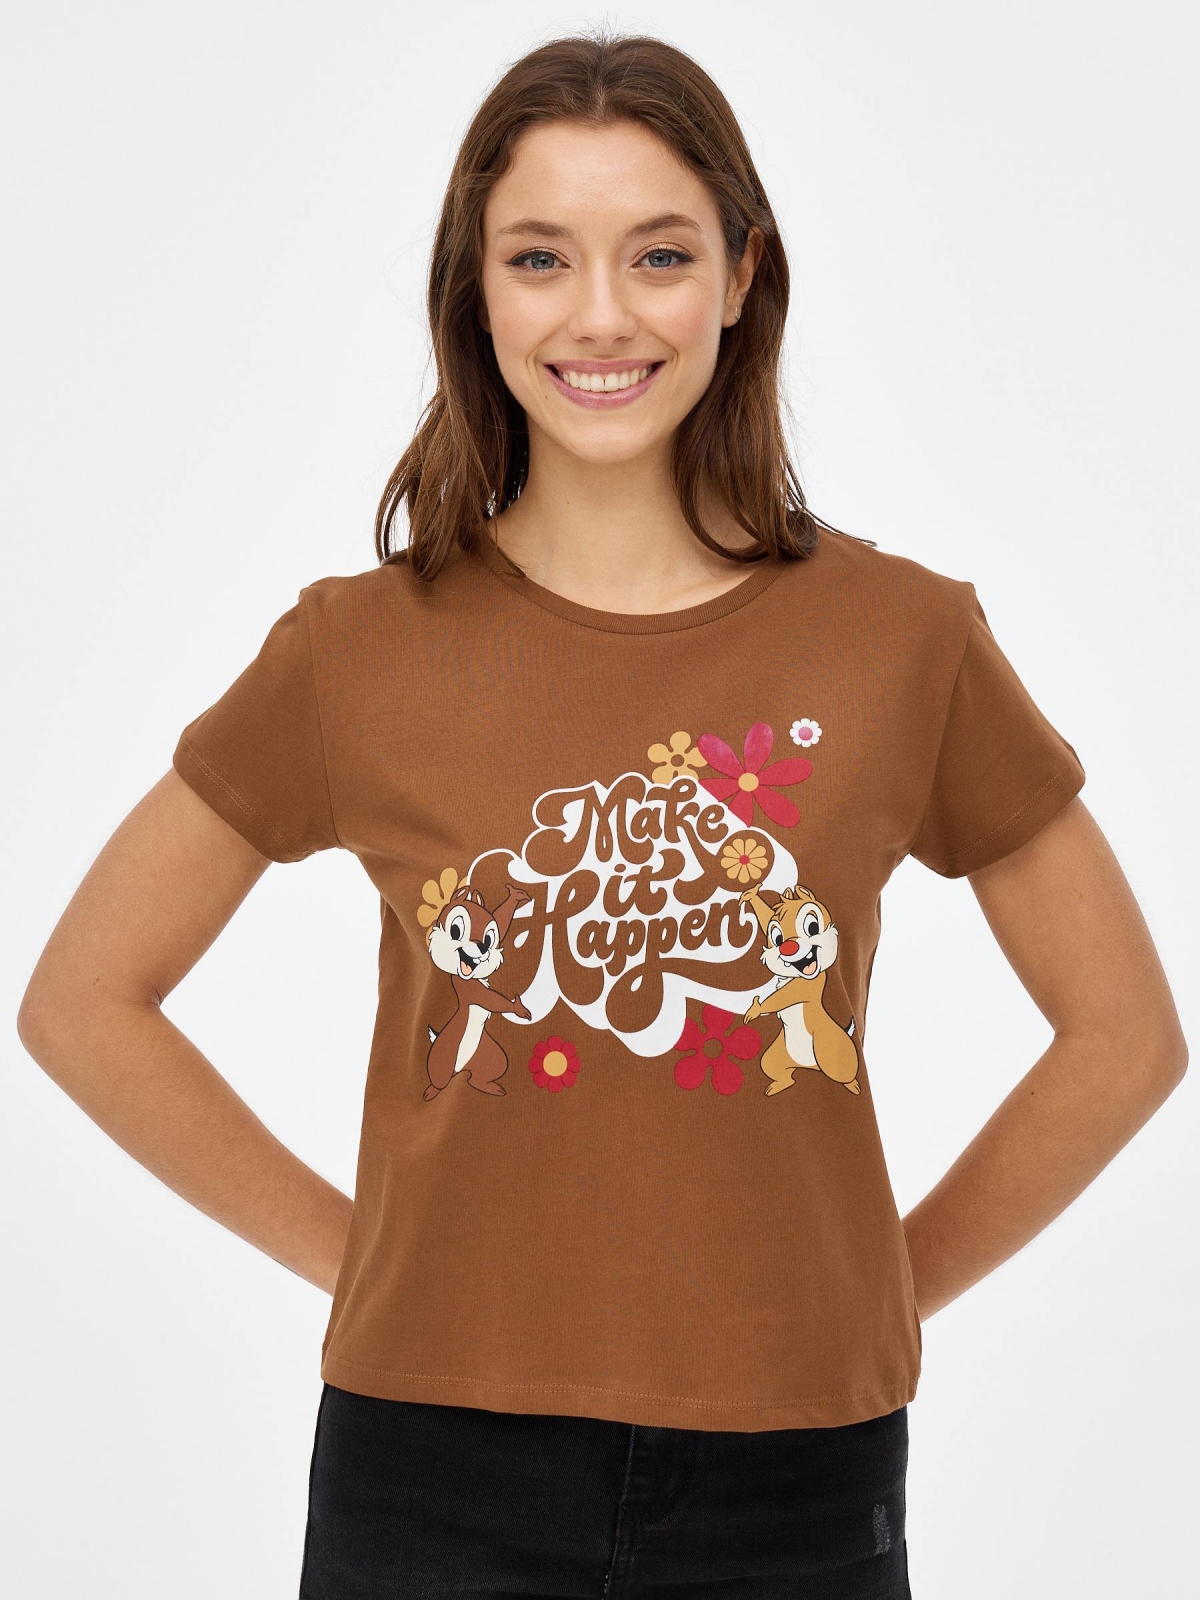 Chip and Chop t-shirt dark brown middle front view